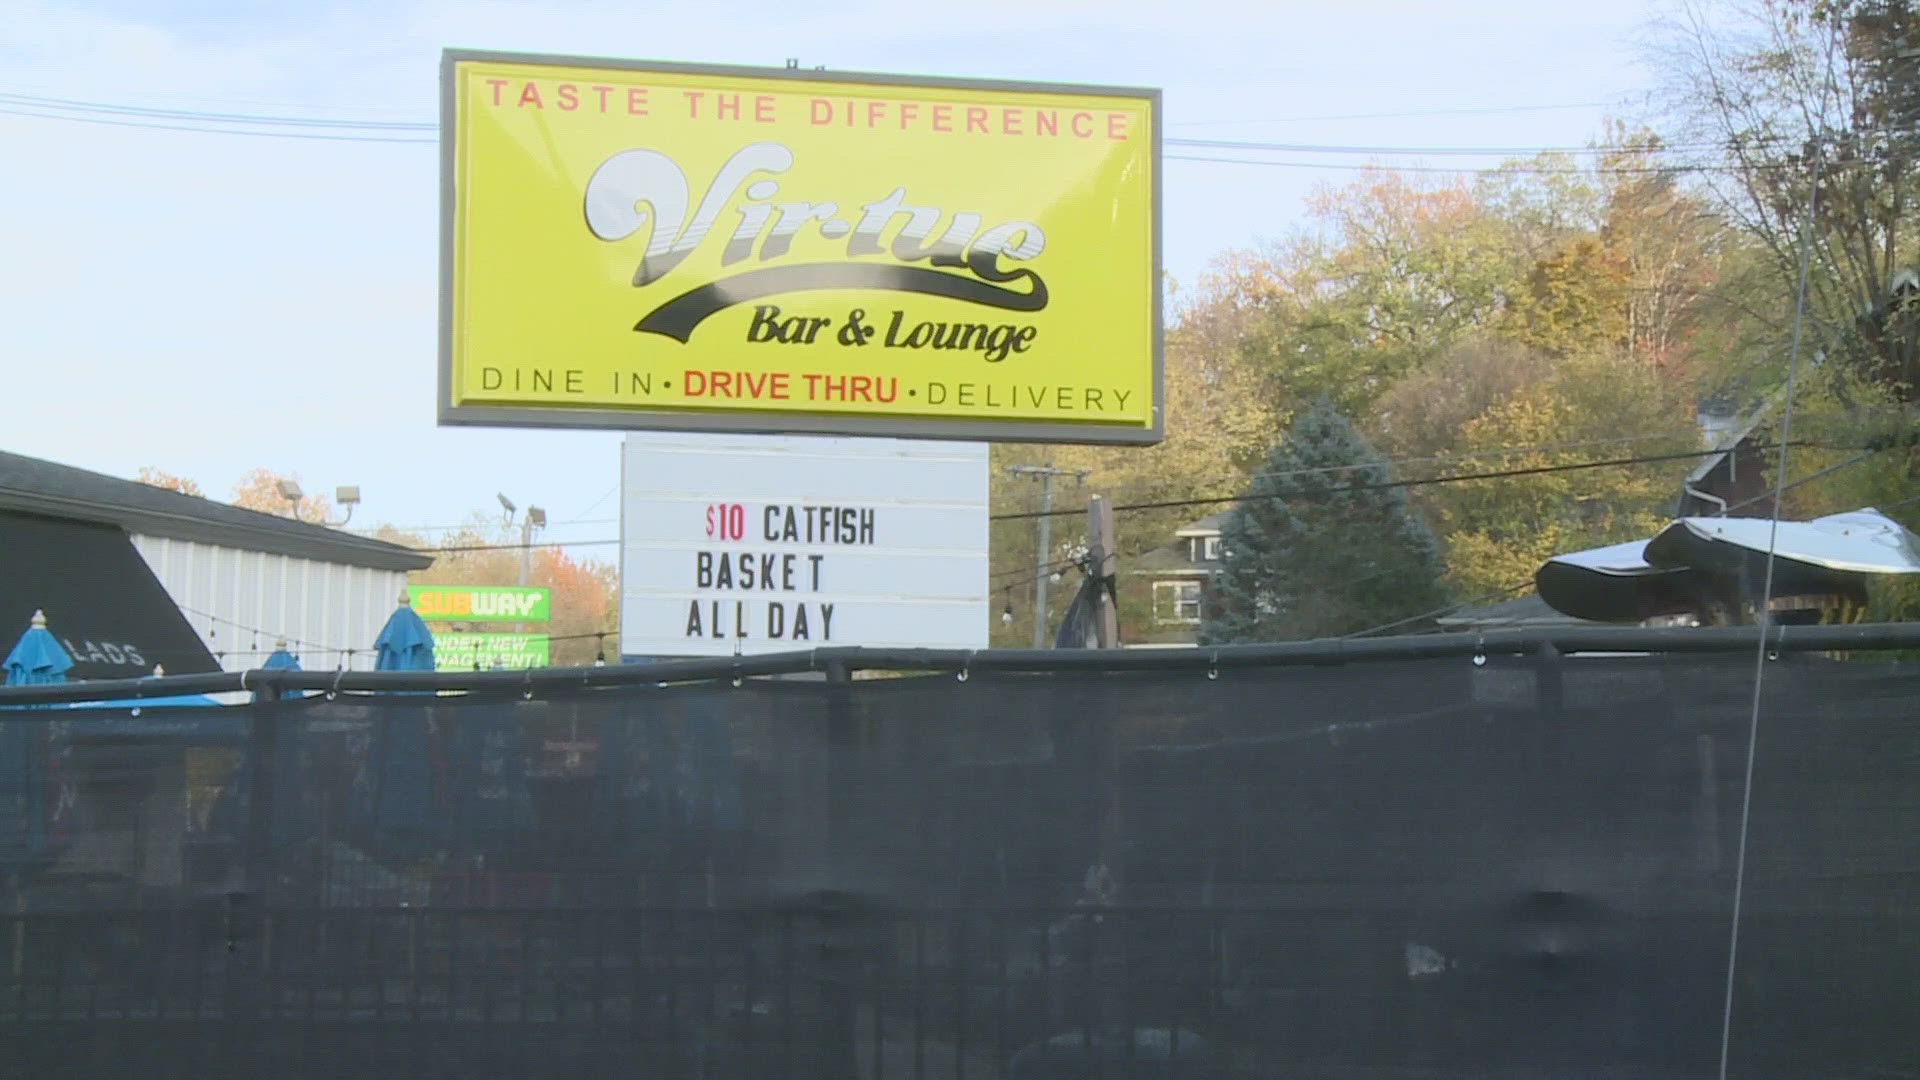 Virtue Bar & Lounge is the only restaurant selling alcohol in the district.